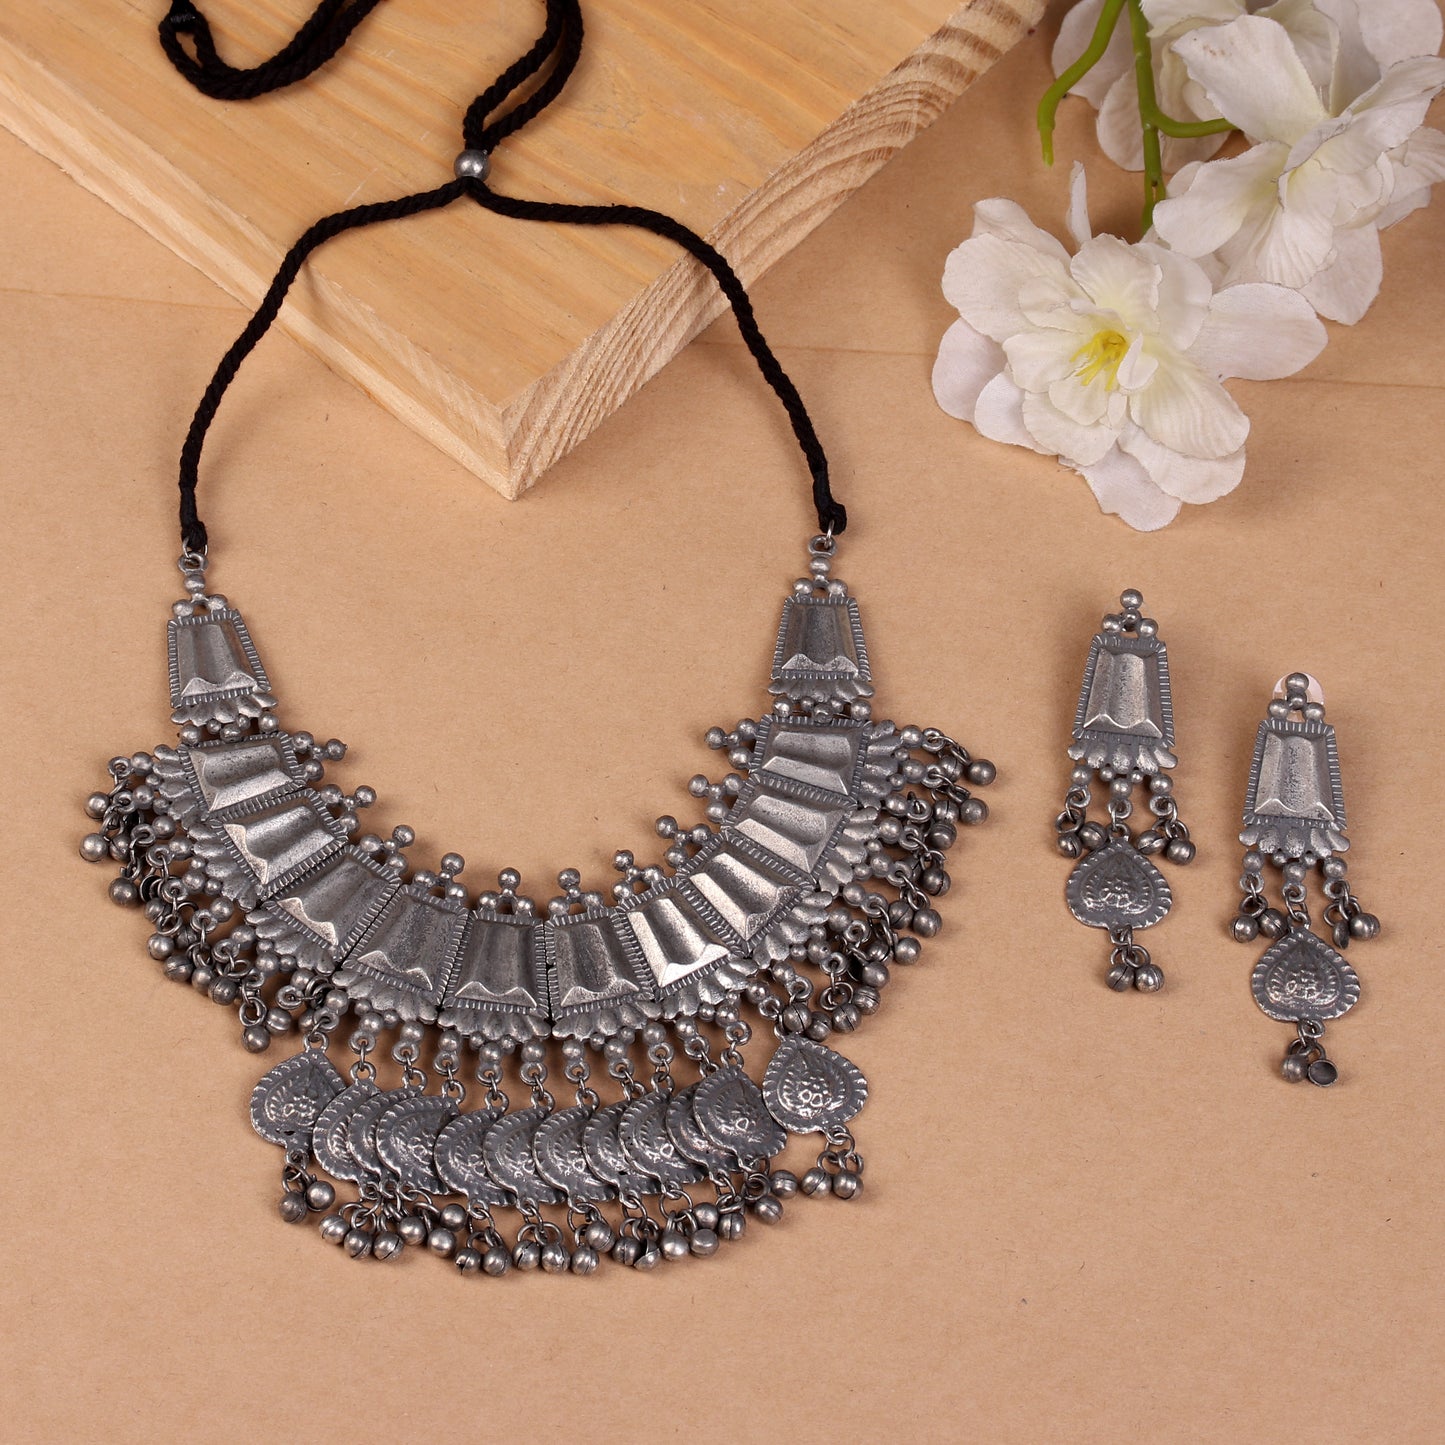 The Polished Cleavers Necklace Set